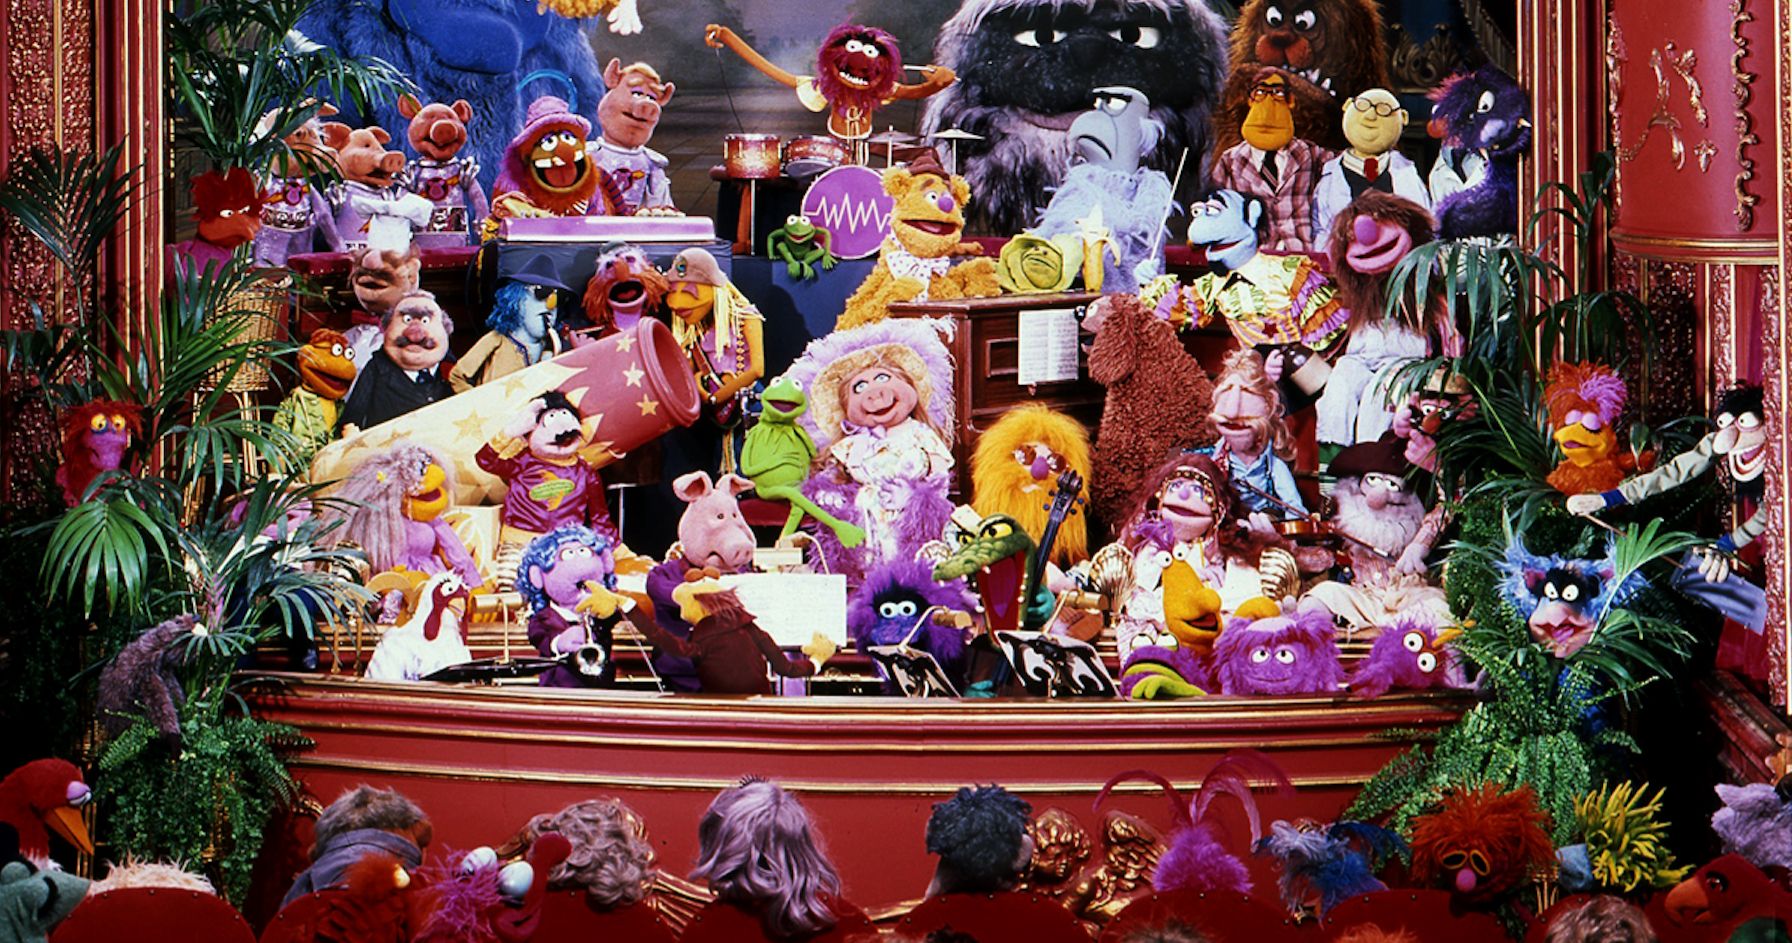 The Muppet Show Is Streaming All 5 Seasons on Disney+ This February